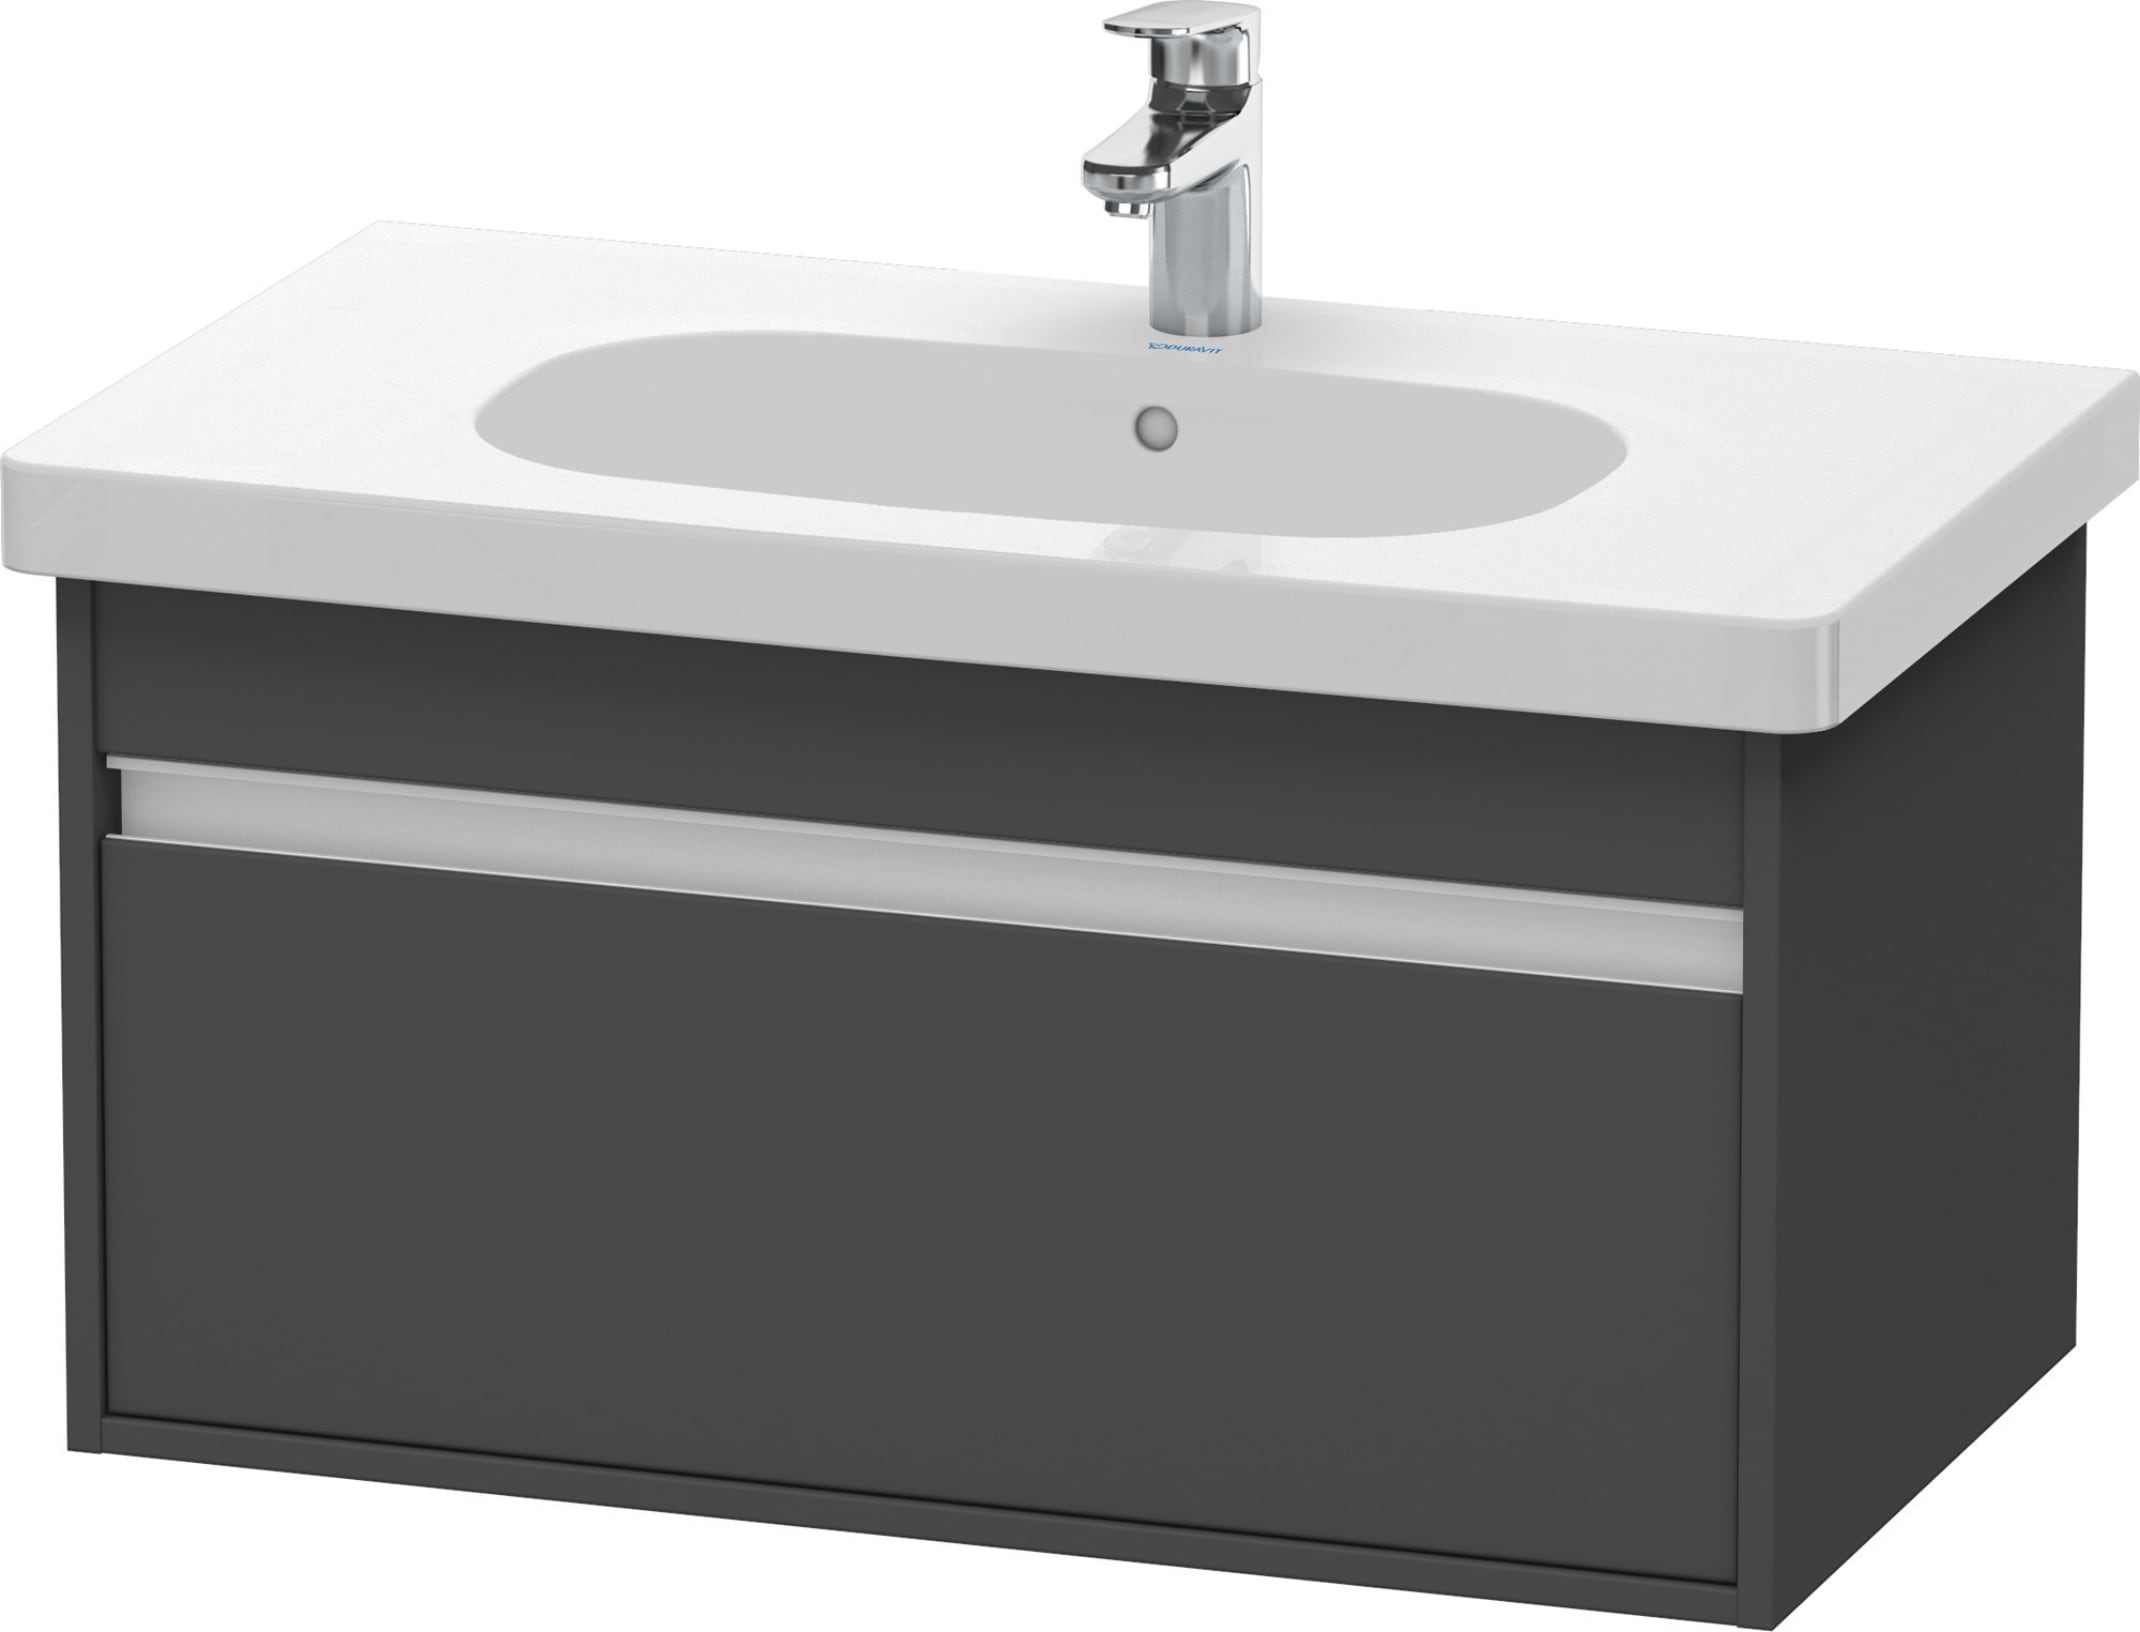 Ketho 31-in Graphite Matte Bathroom Vanity Base Cabinet without Top in Gray | - Duravit KT666704949